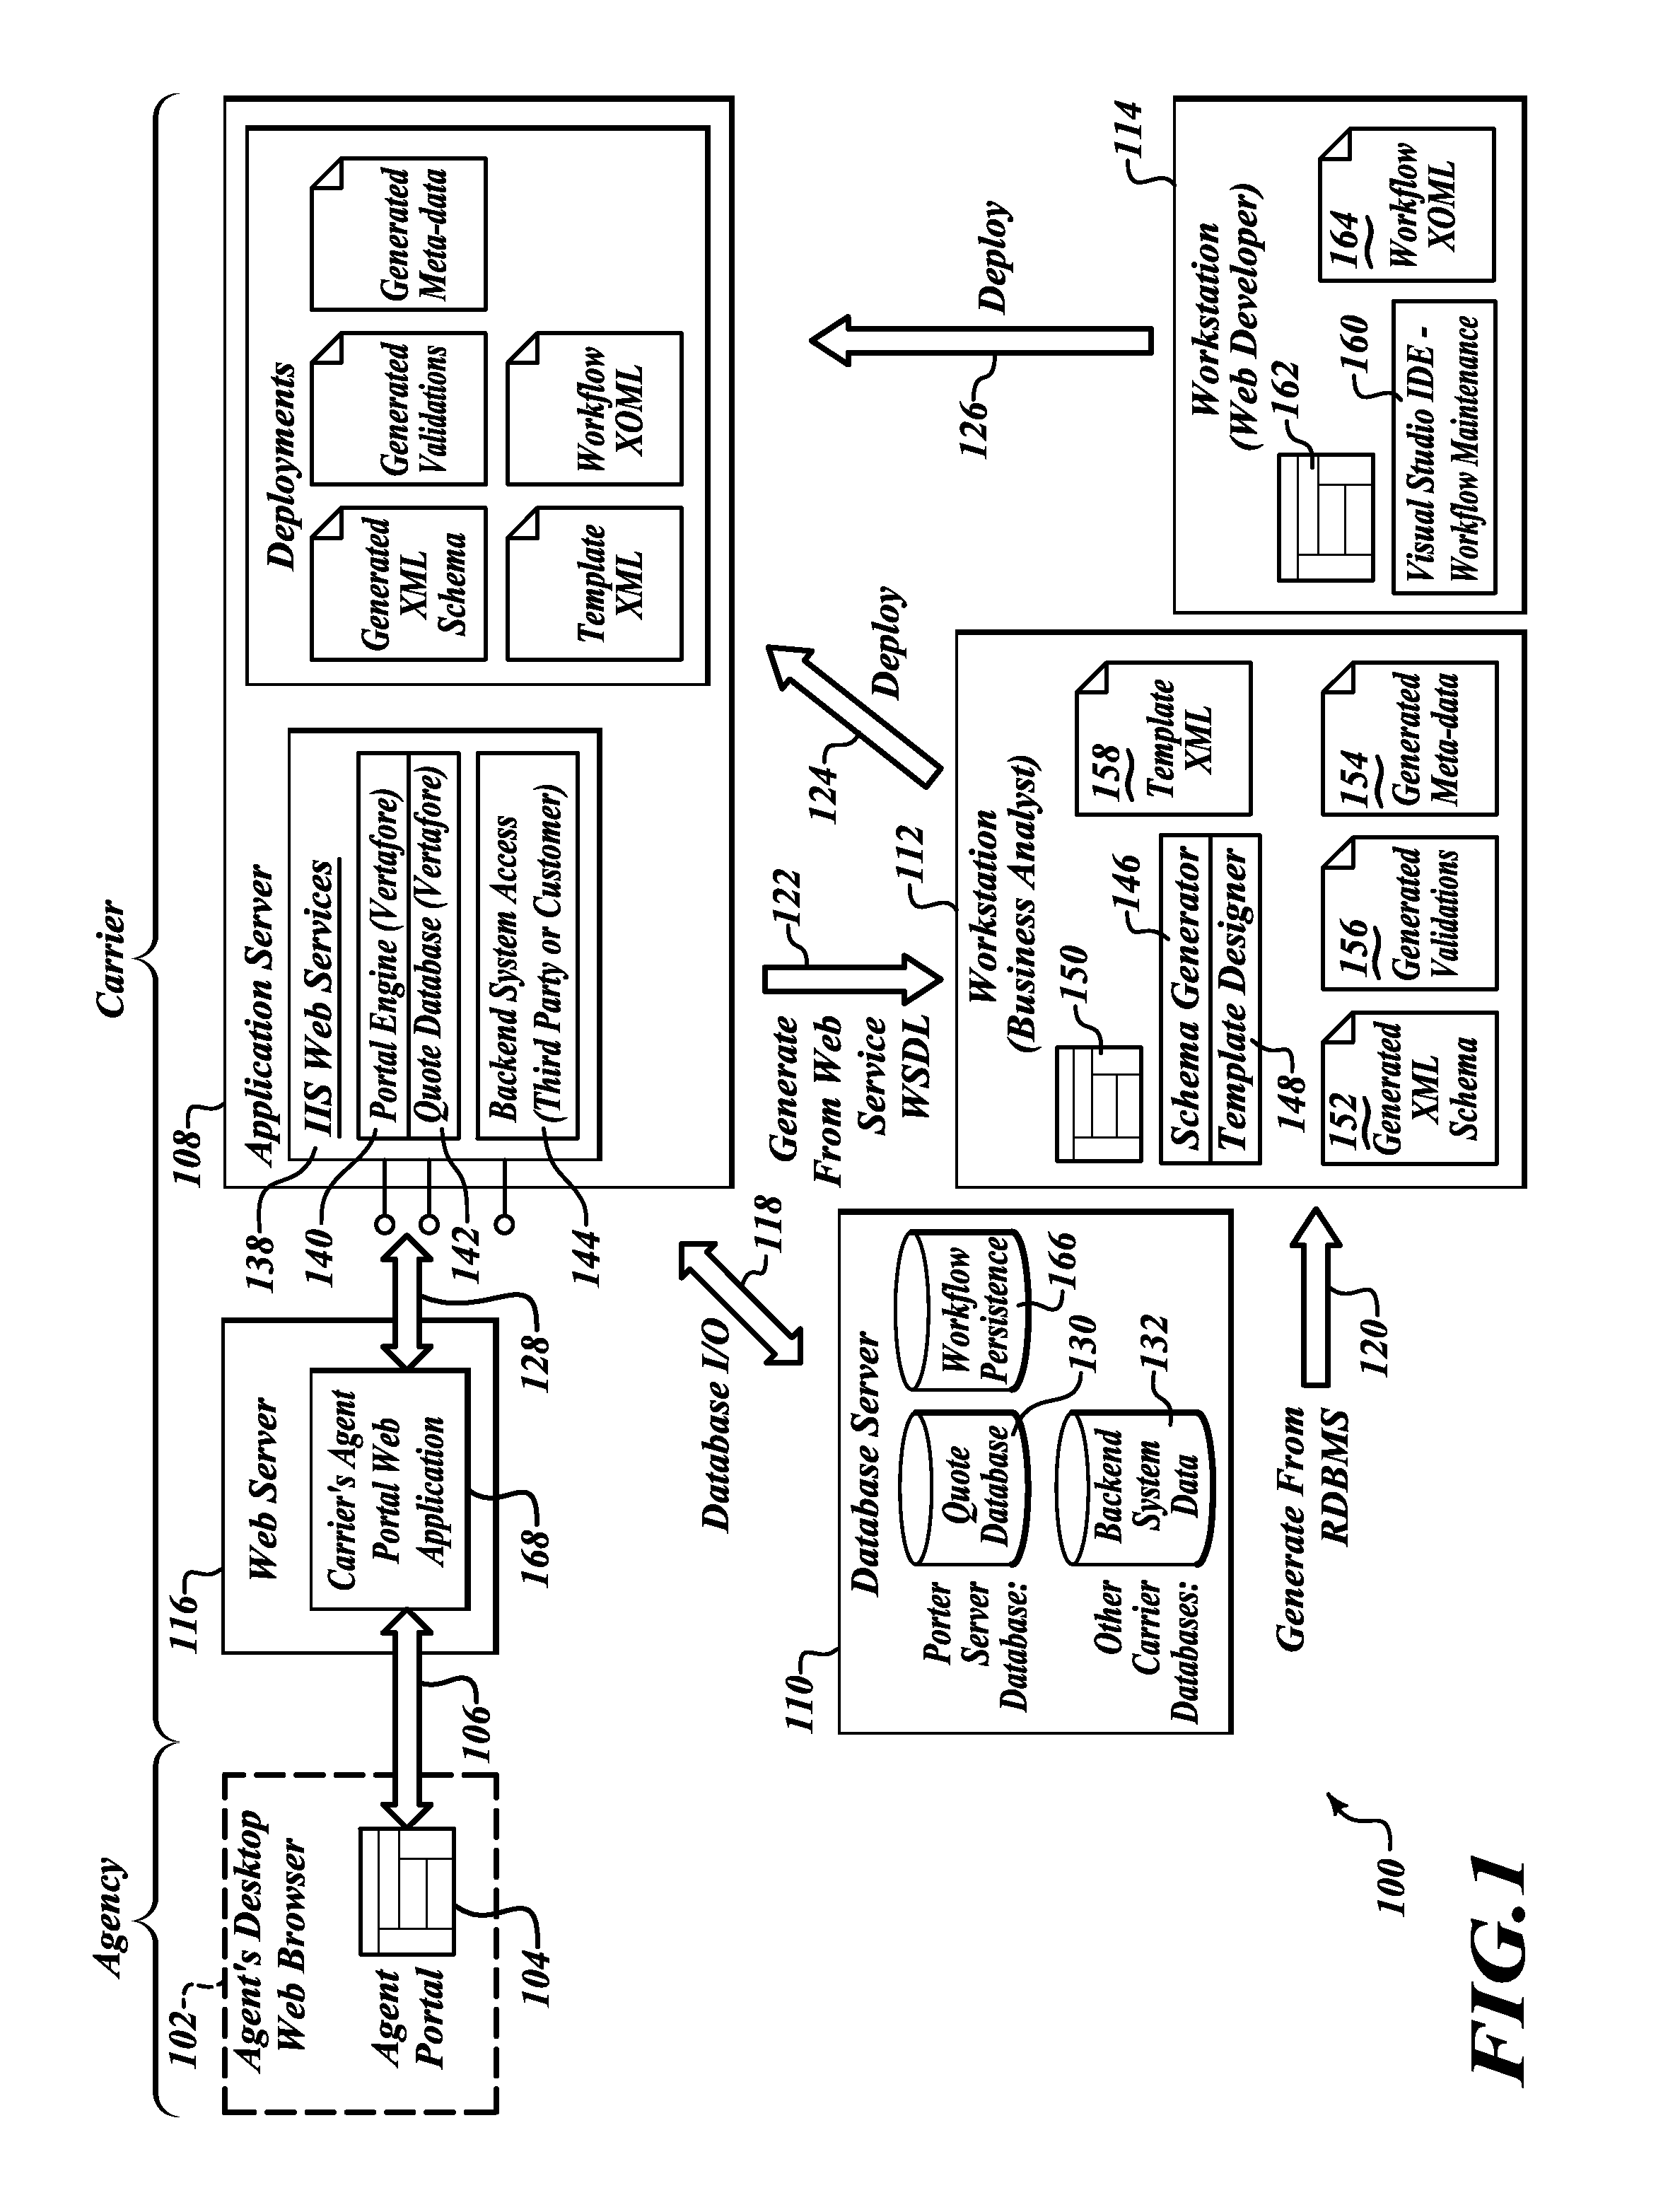 Systems, methods and articles for template based generation of markup documents to access back office systems